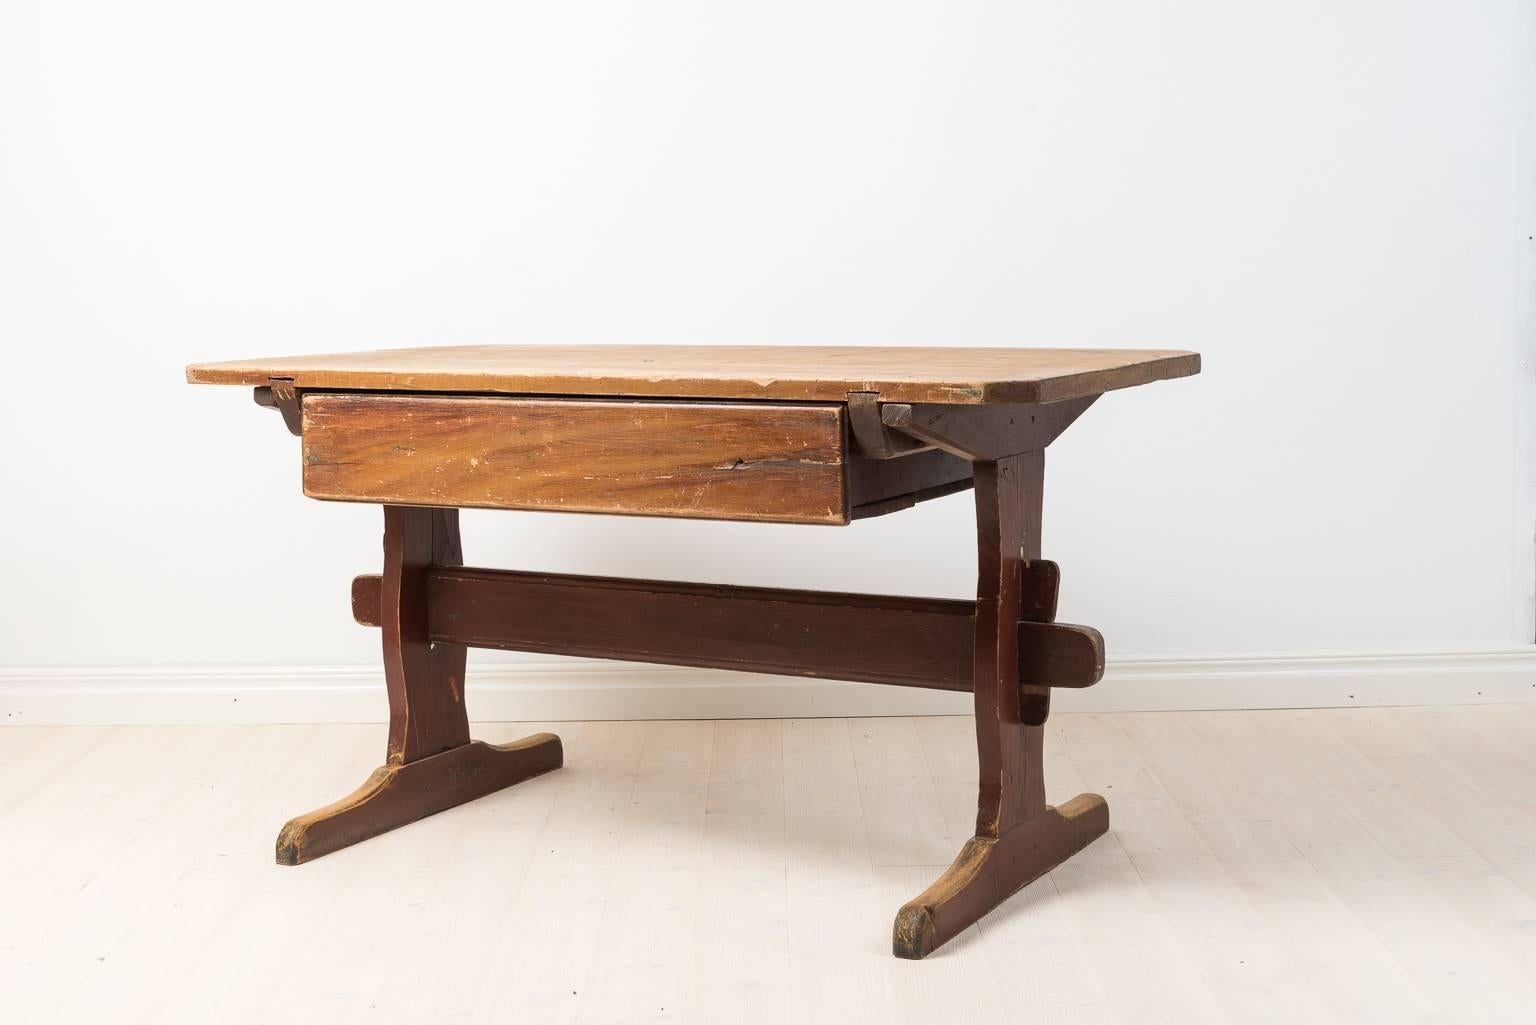 Hand-Crafted Early 19th Century Painted Swedish Folk Art Trestle Table